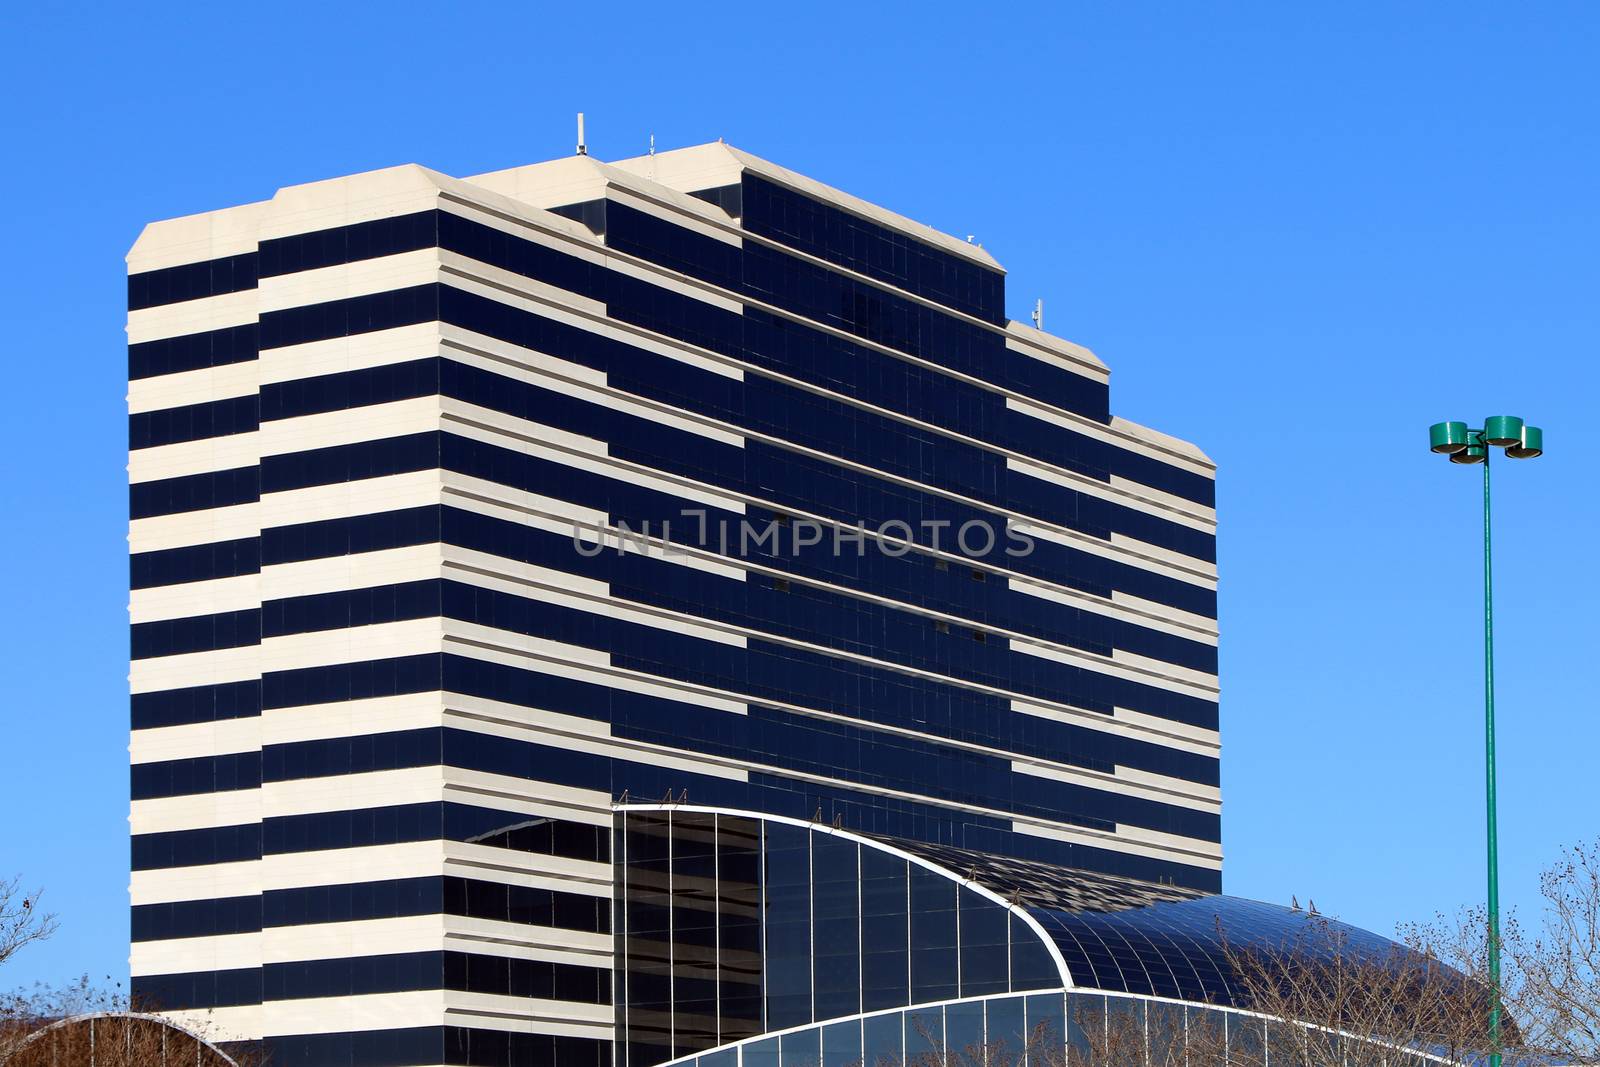 Beautiful modern office building set against a blue sky.  The building also has a lower level atrium area visible.  The building is built of glass and stucco over a steel frame.